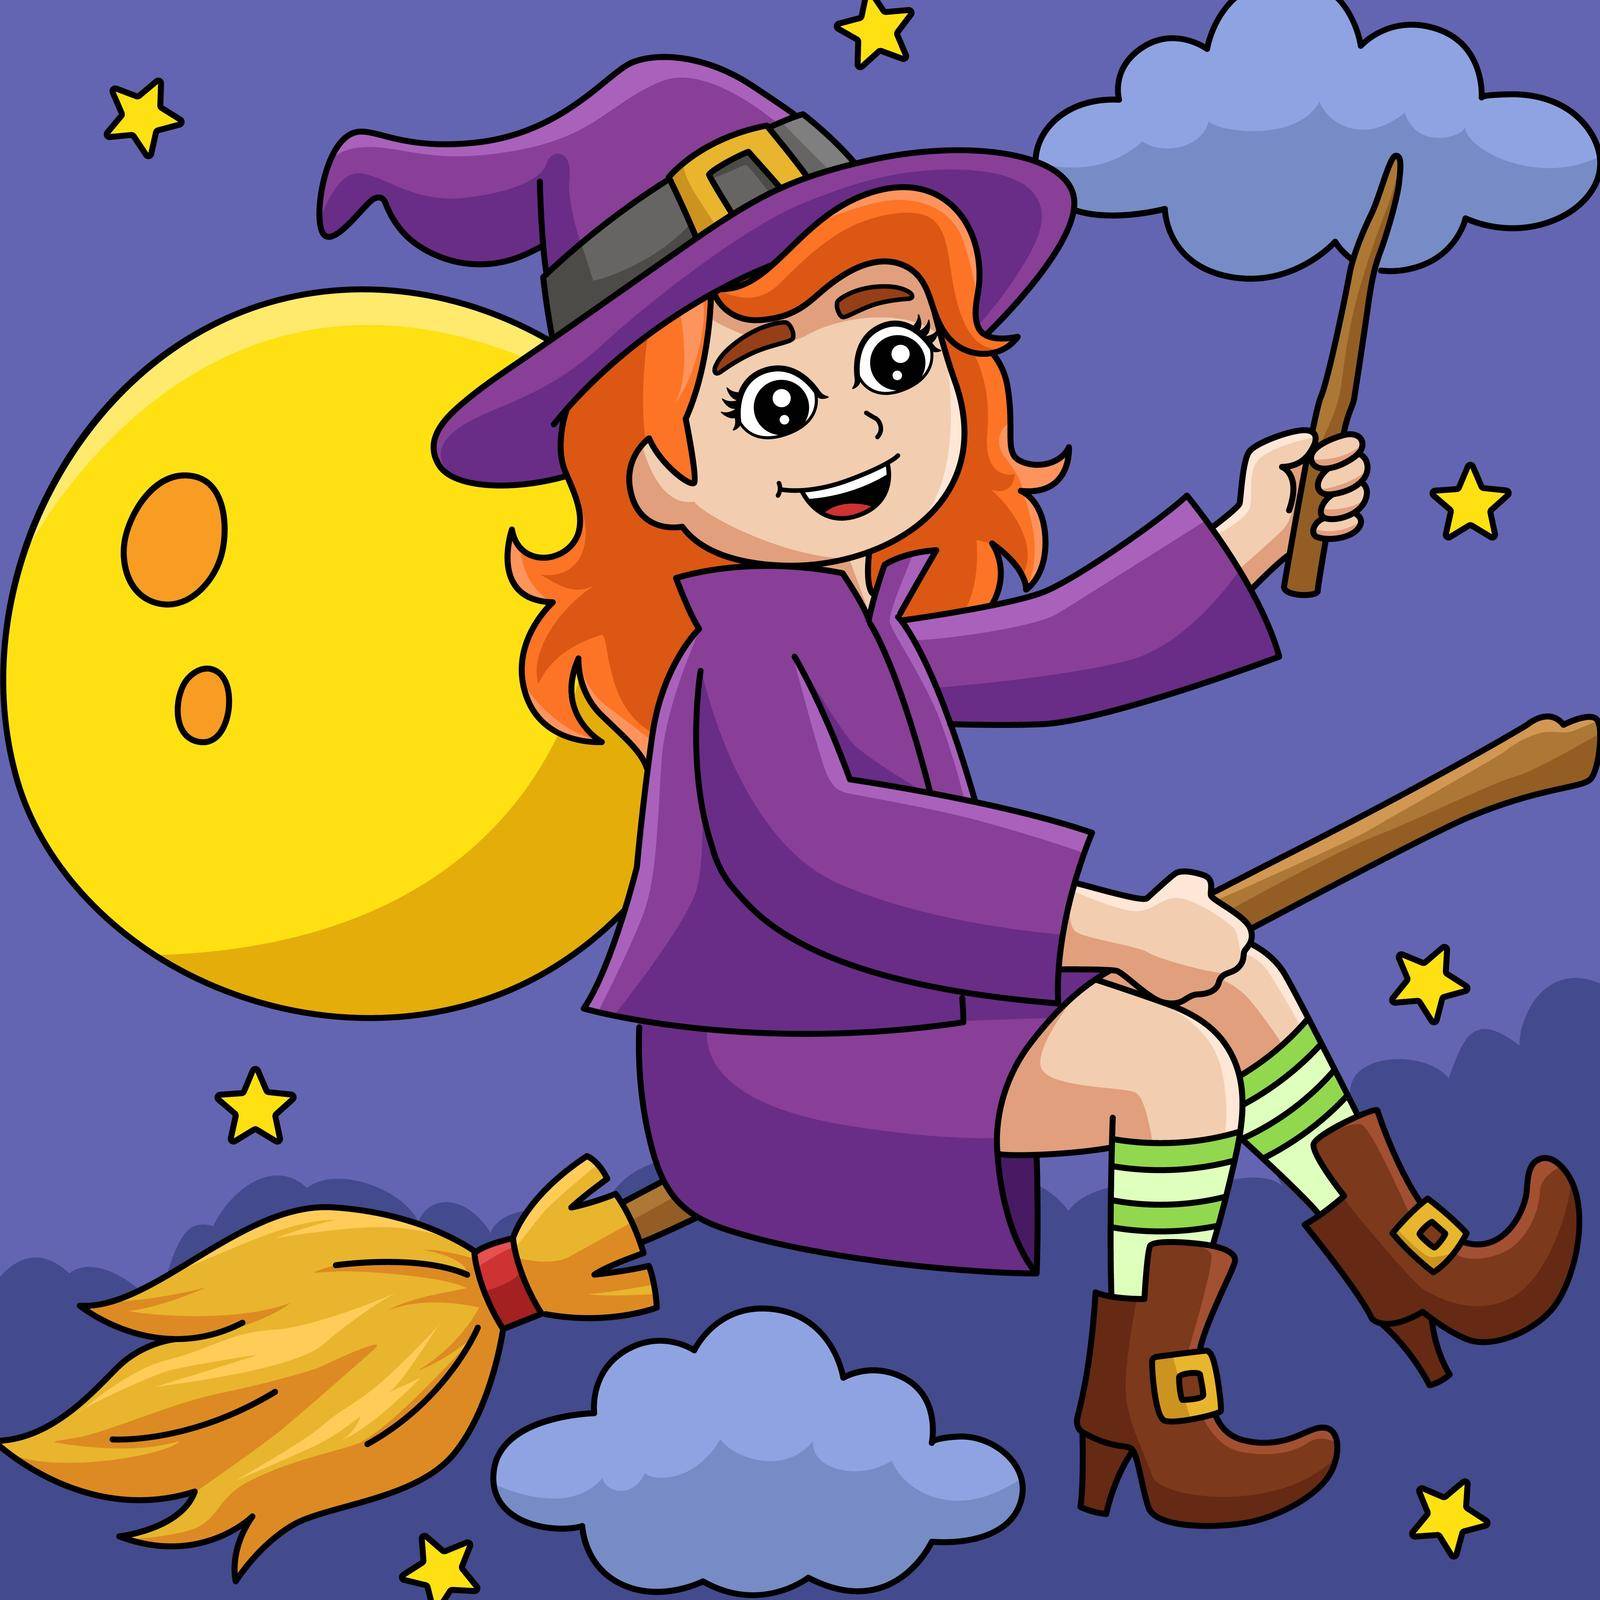 This cartoon illustration shows a witch girl on a broomstick illustration.